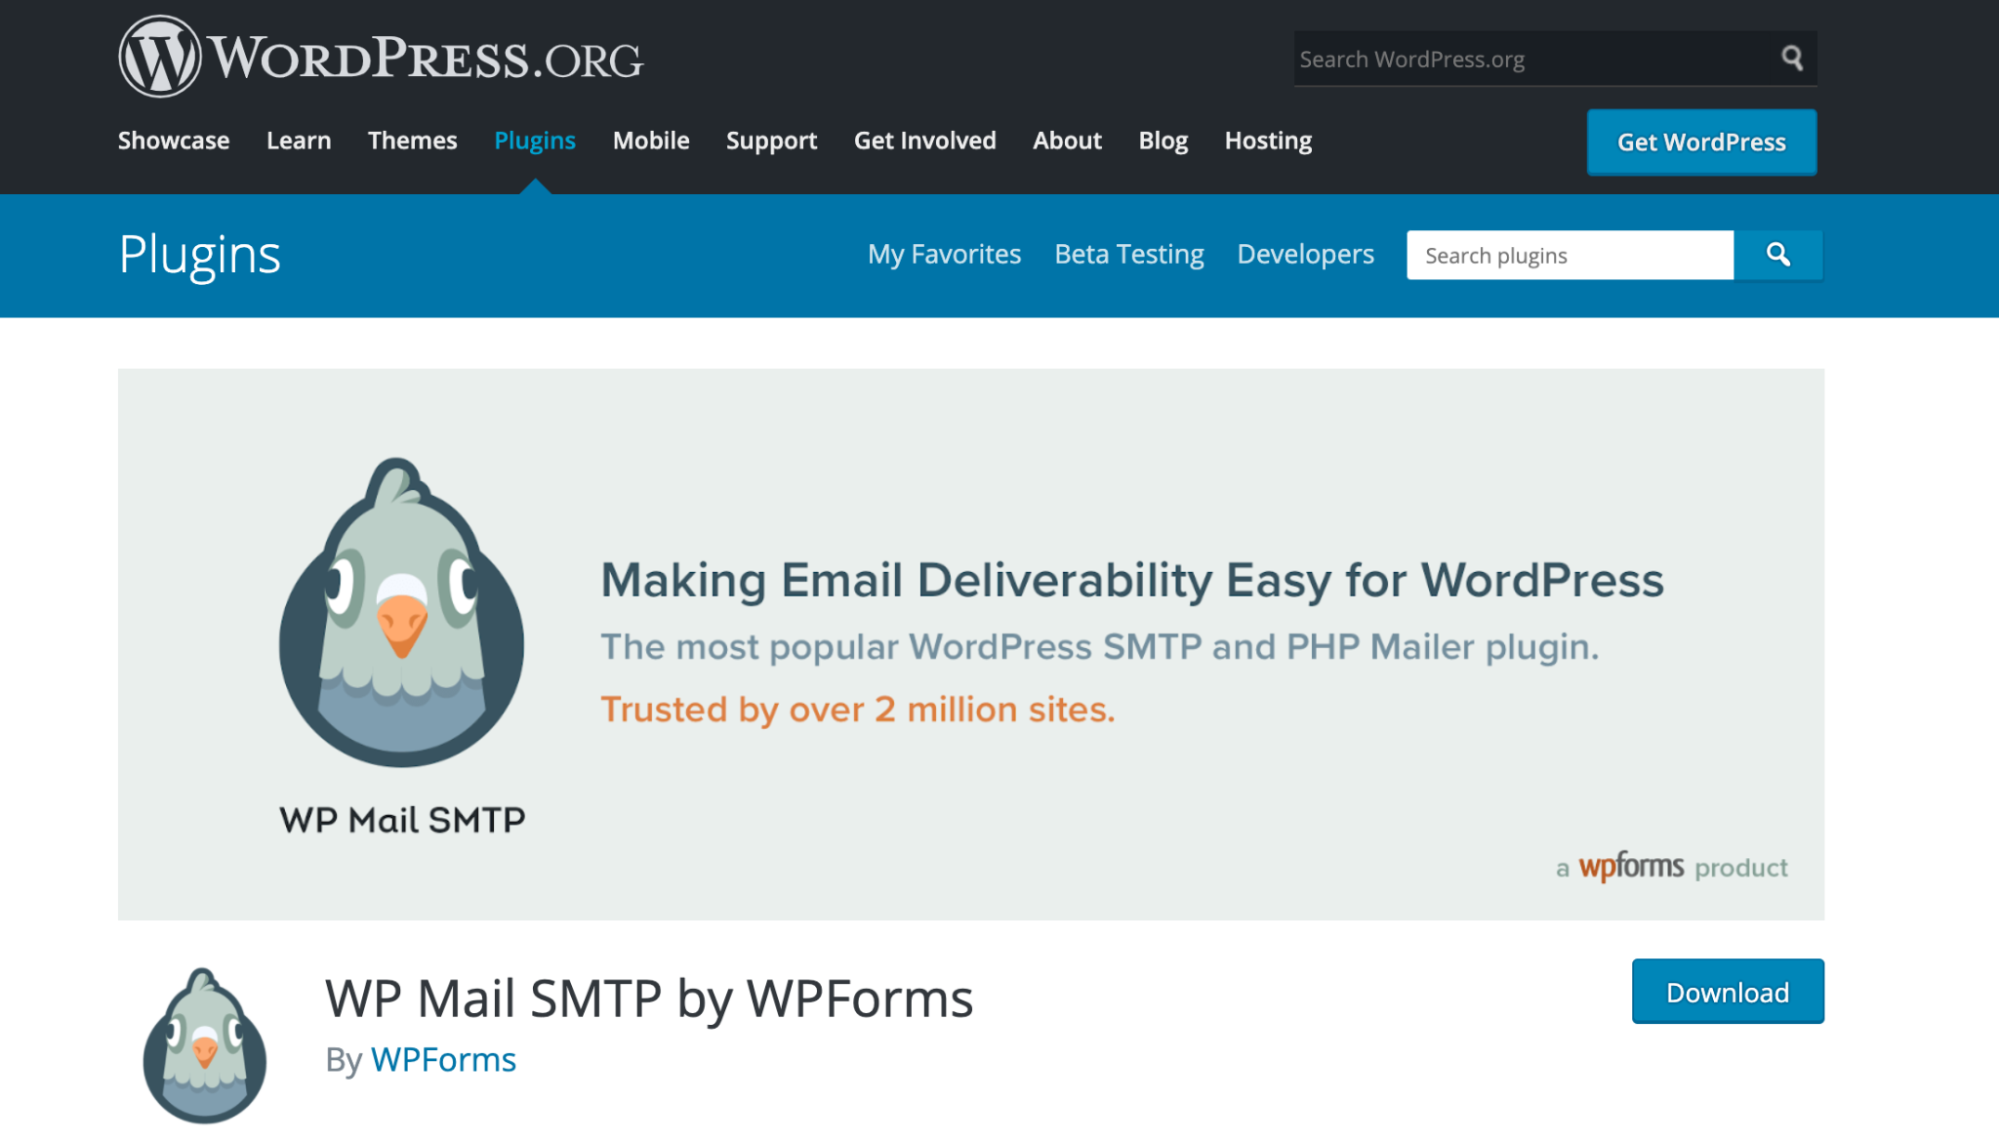 WP Mail SMTP home page